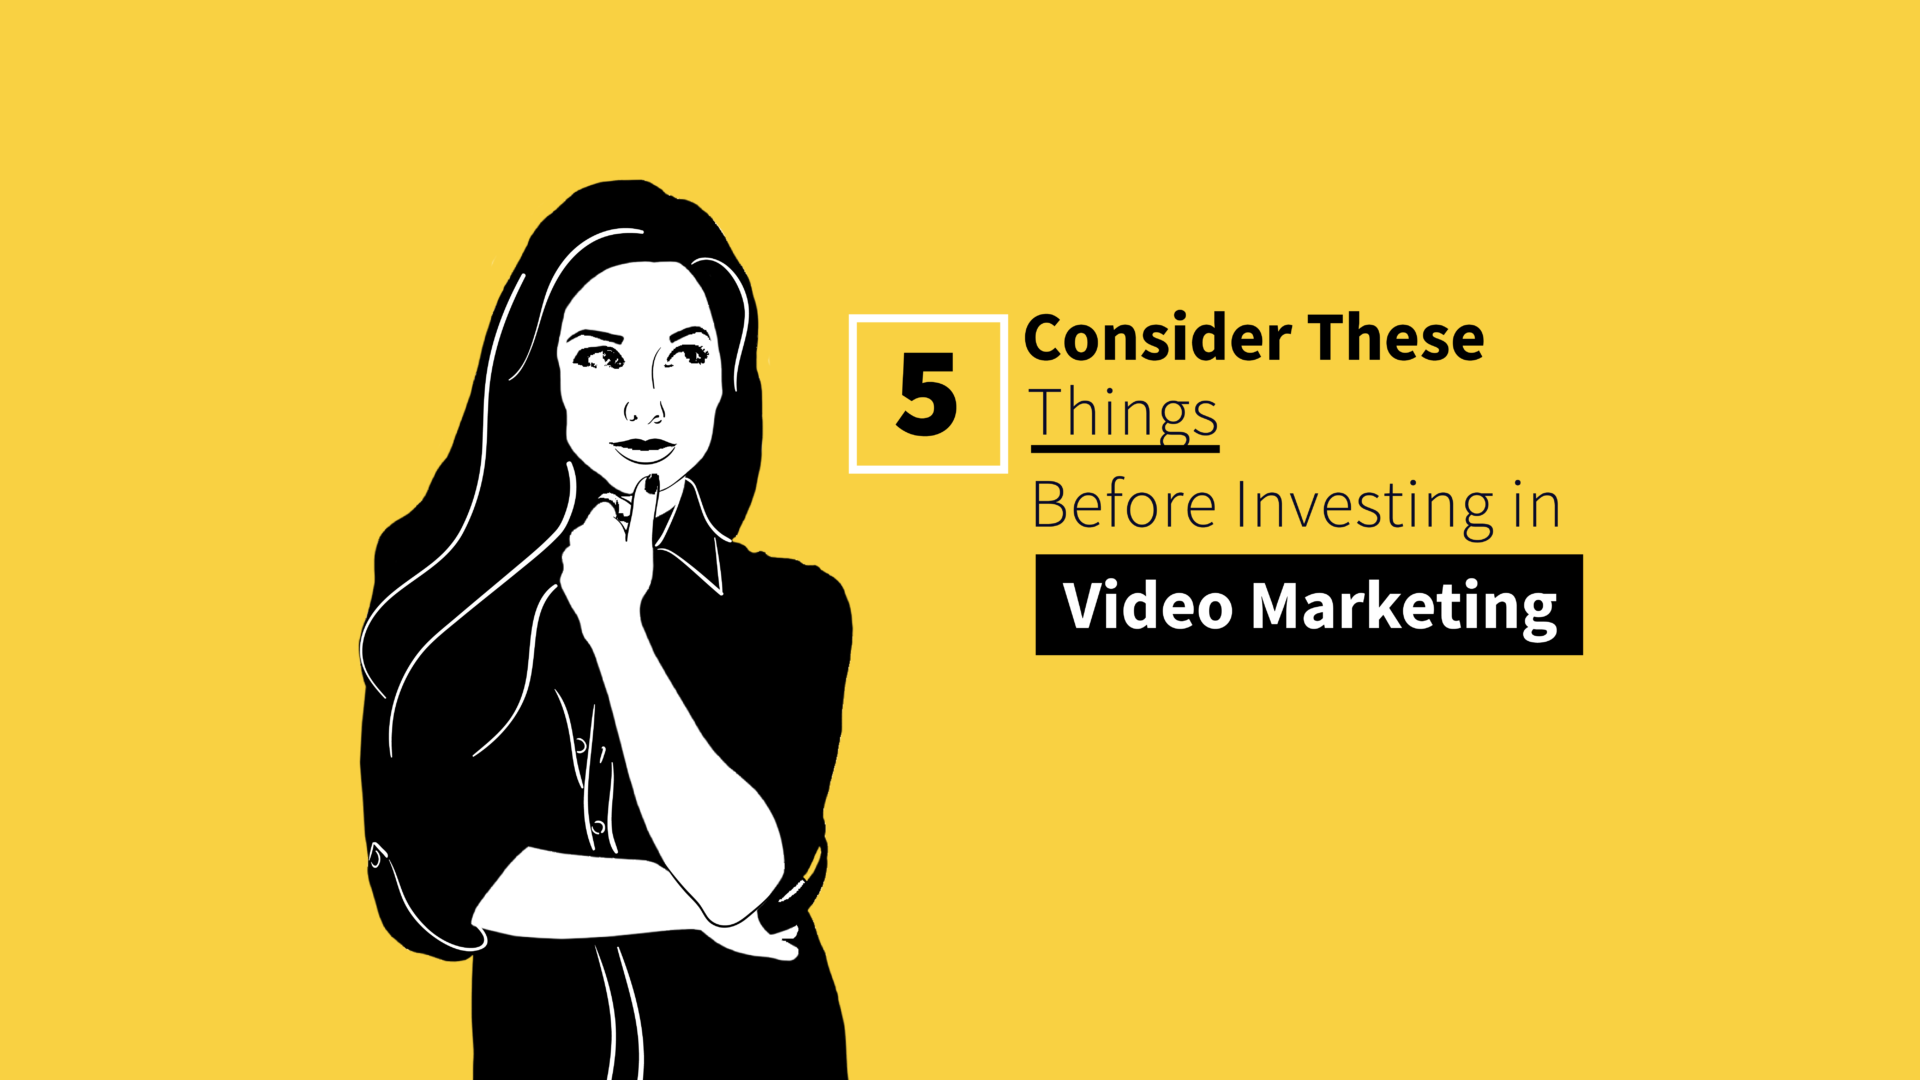 5 Things to Consider Before Investing in Video Marketing